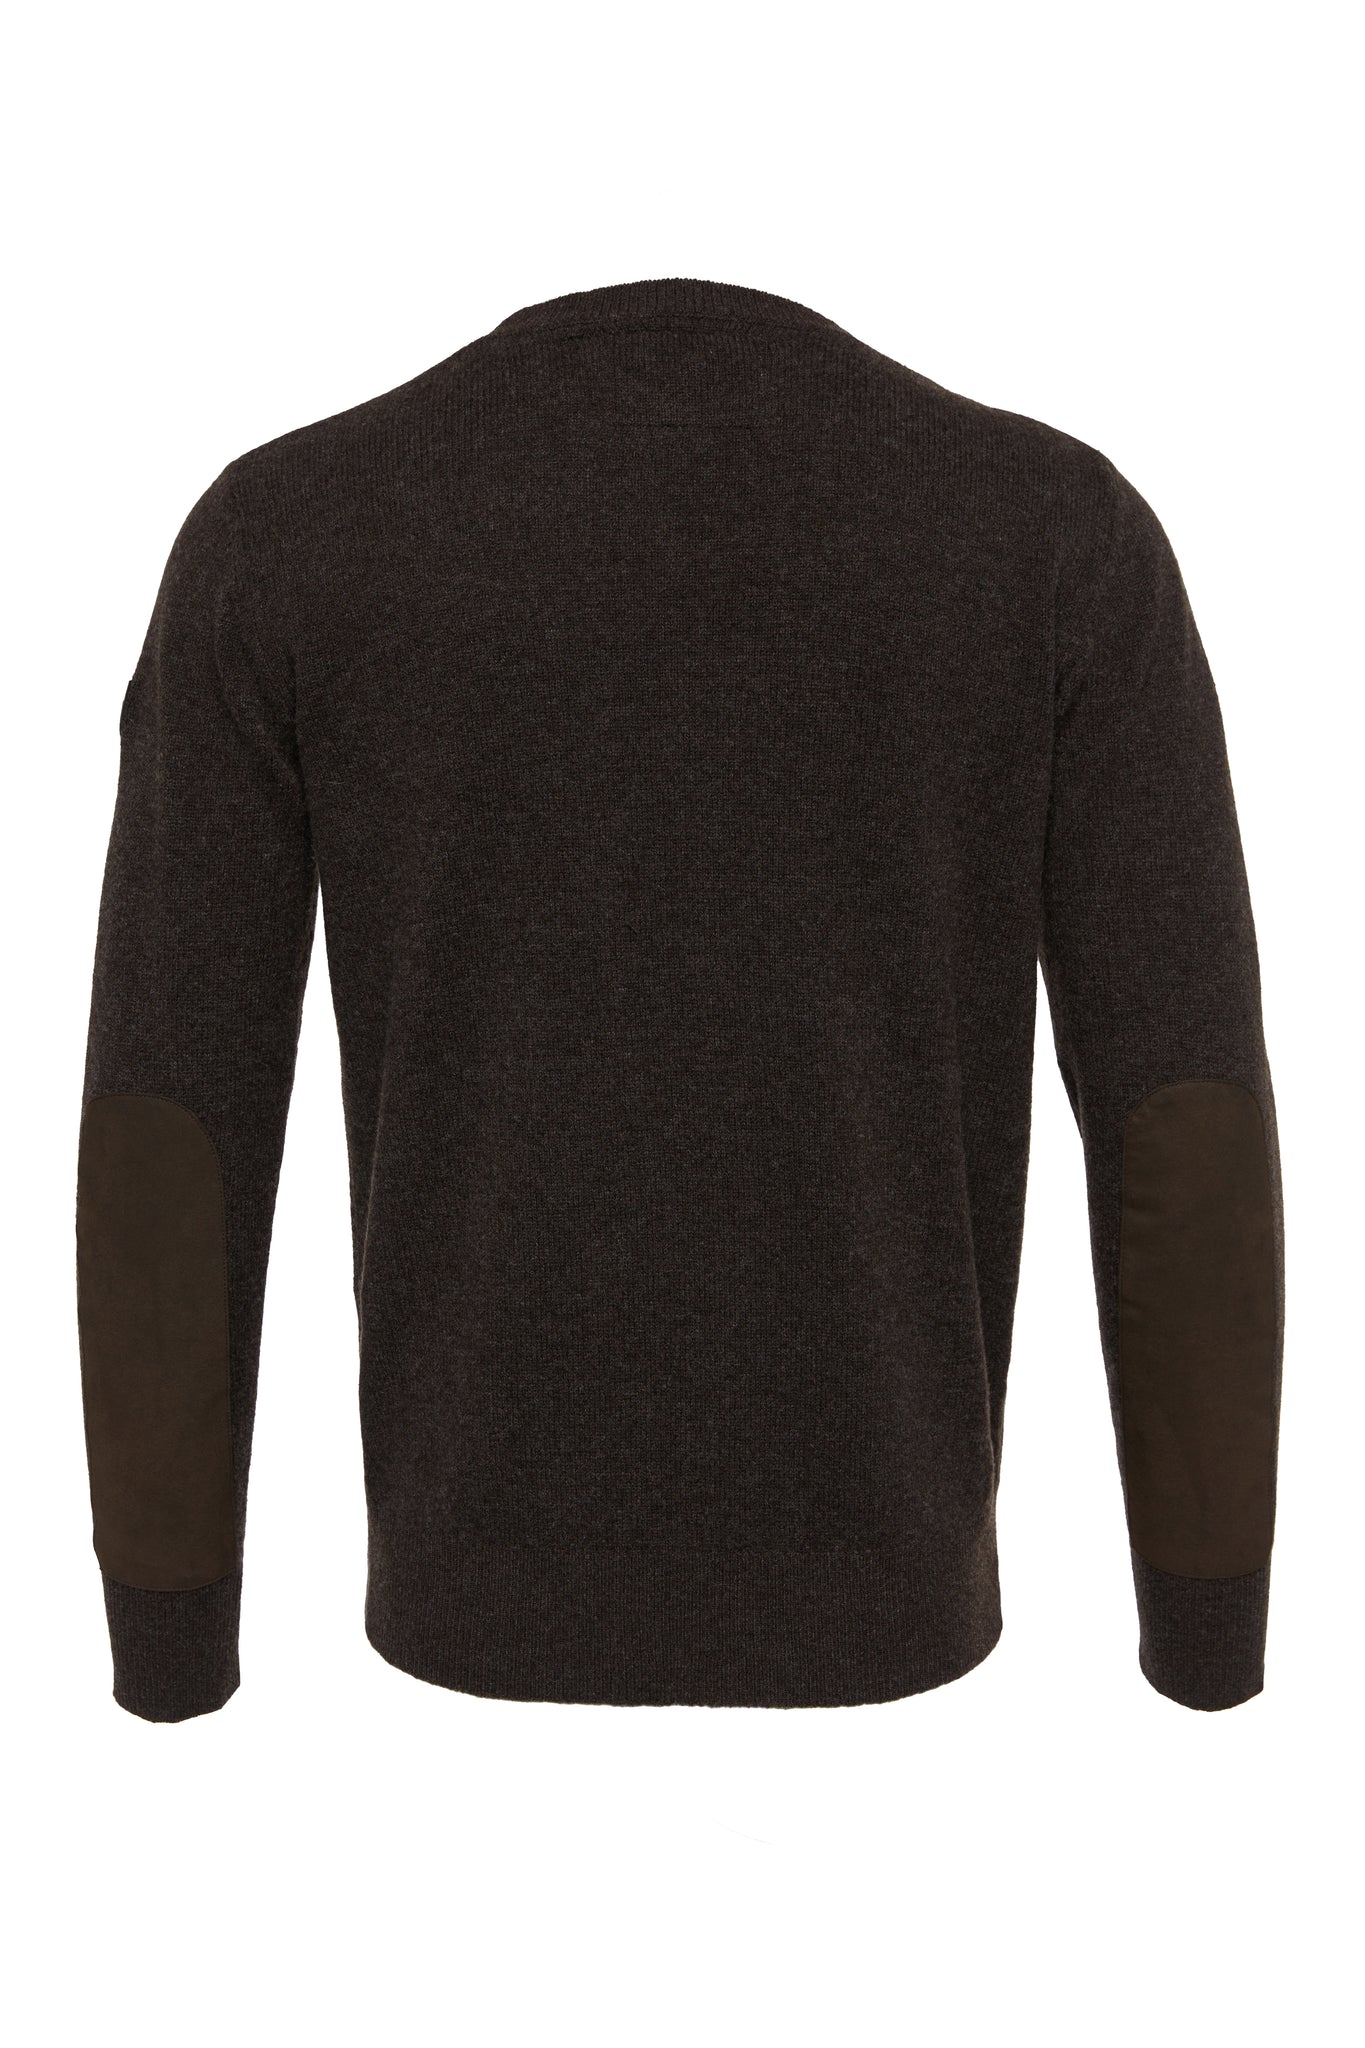 Country Crew Neck Knit (Chocolate)